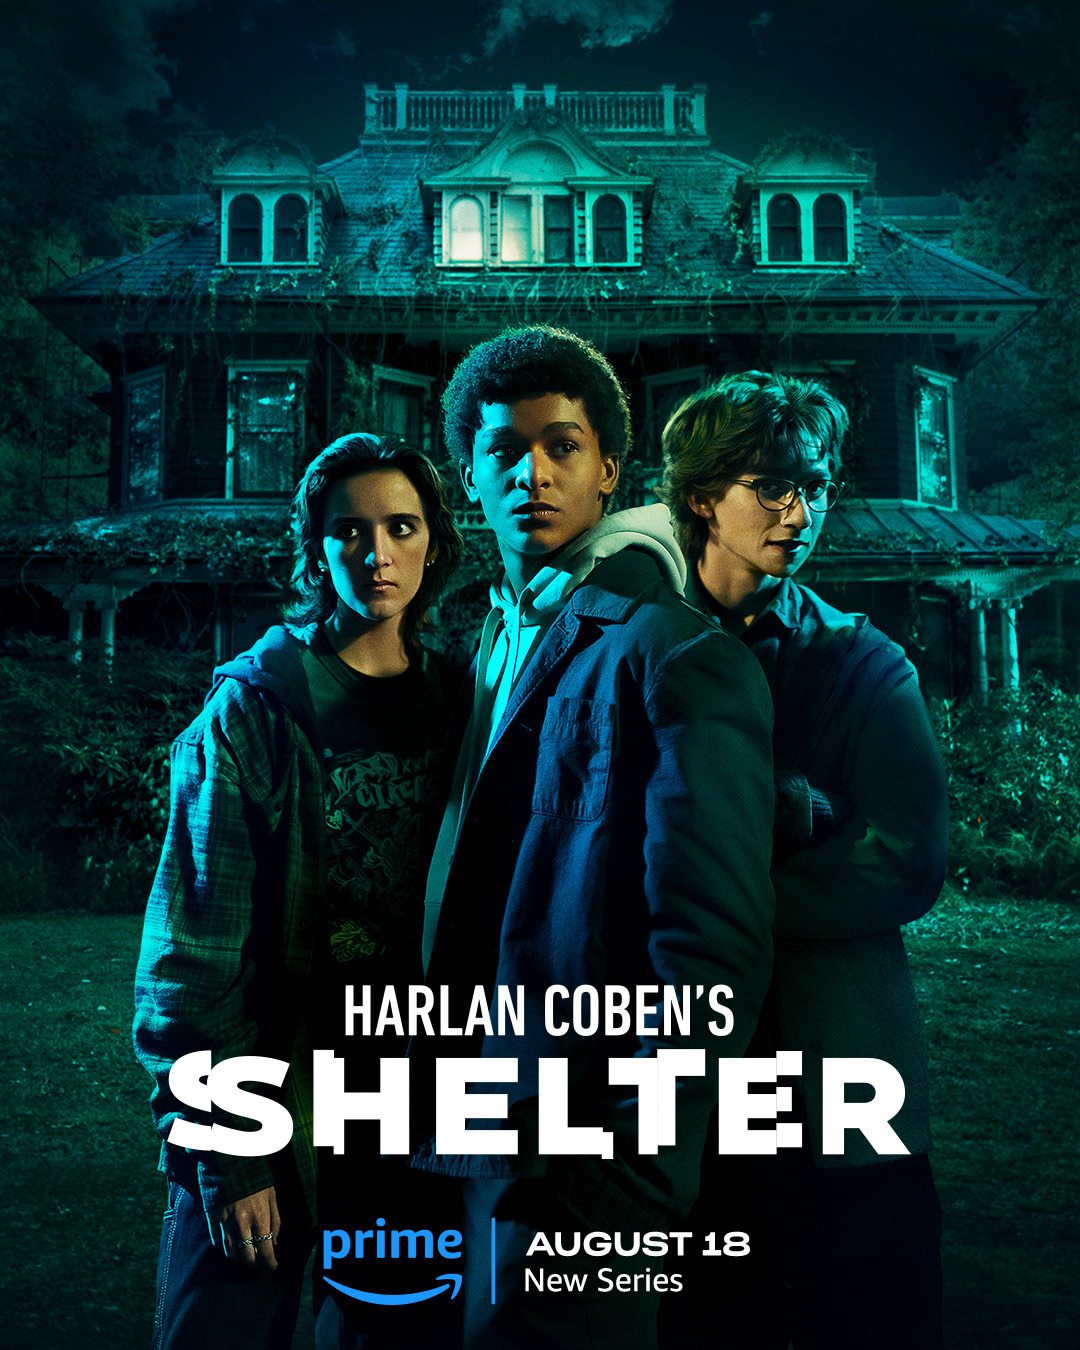 Extra Large TV Poster Image for Harlan Coben's Shelter (#2 of 2)